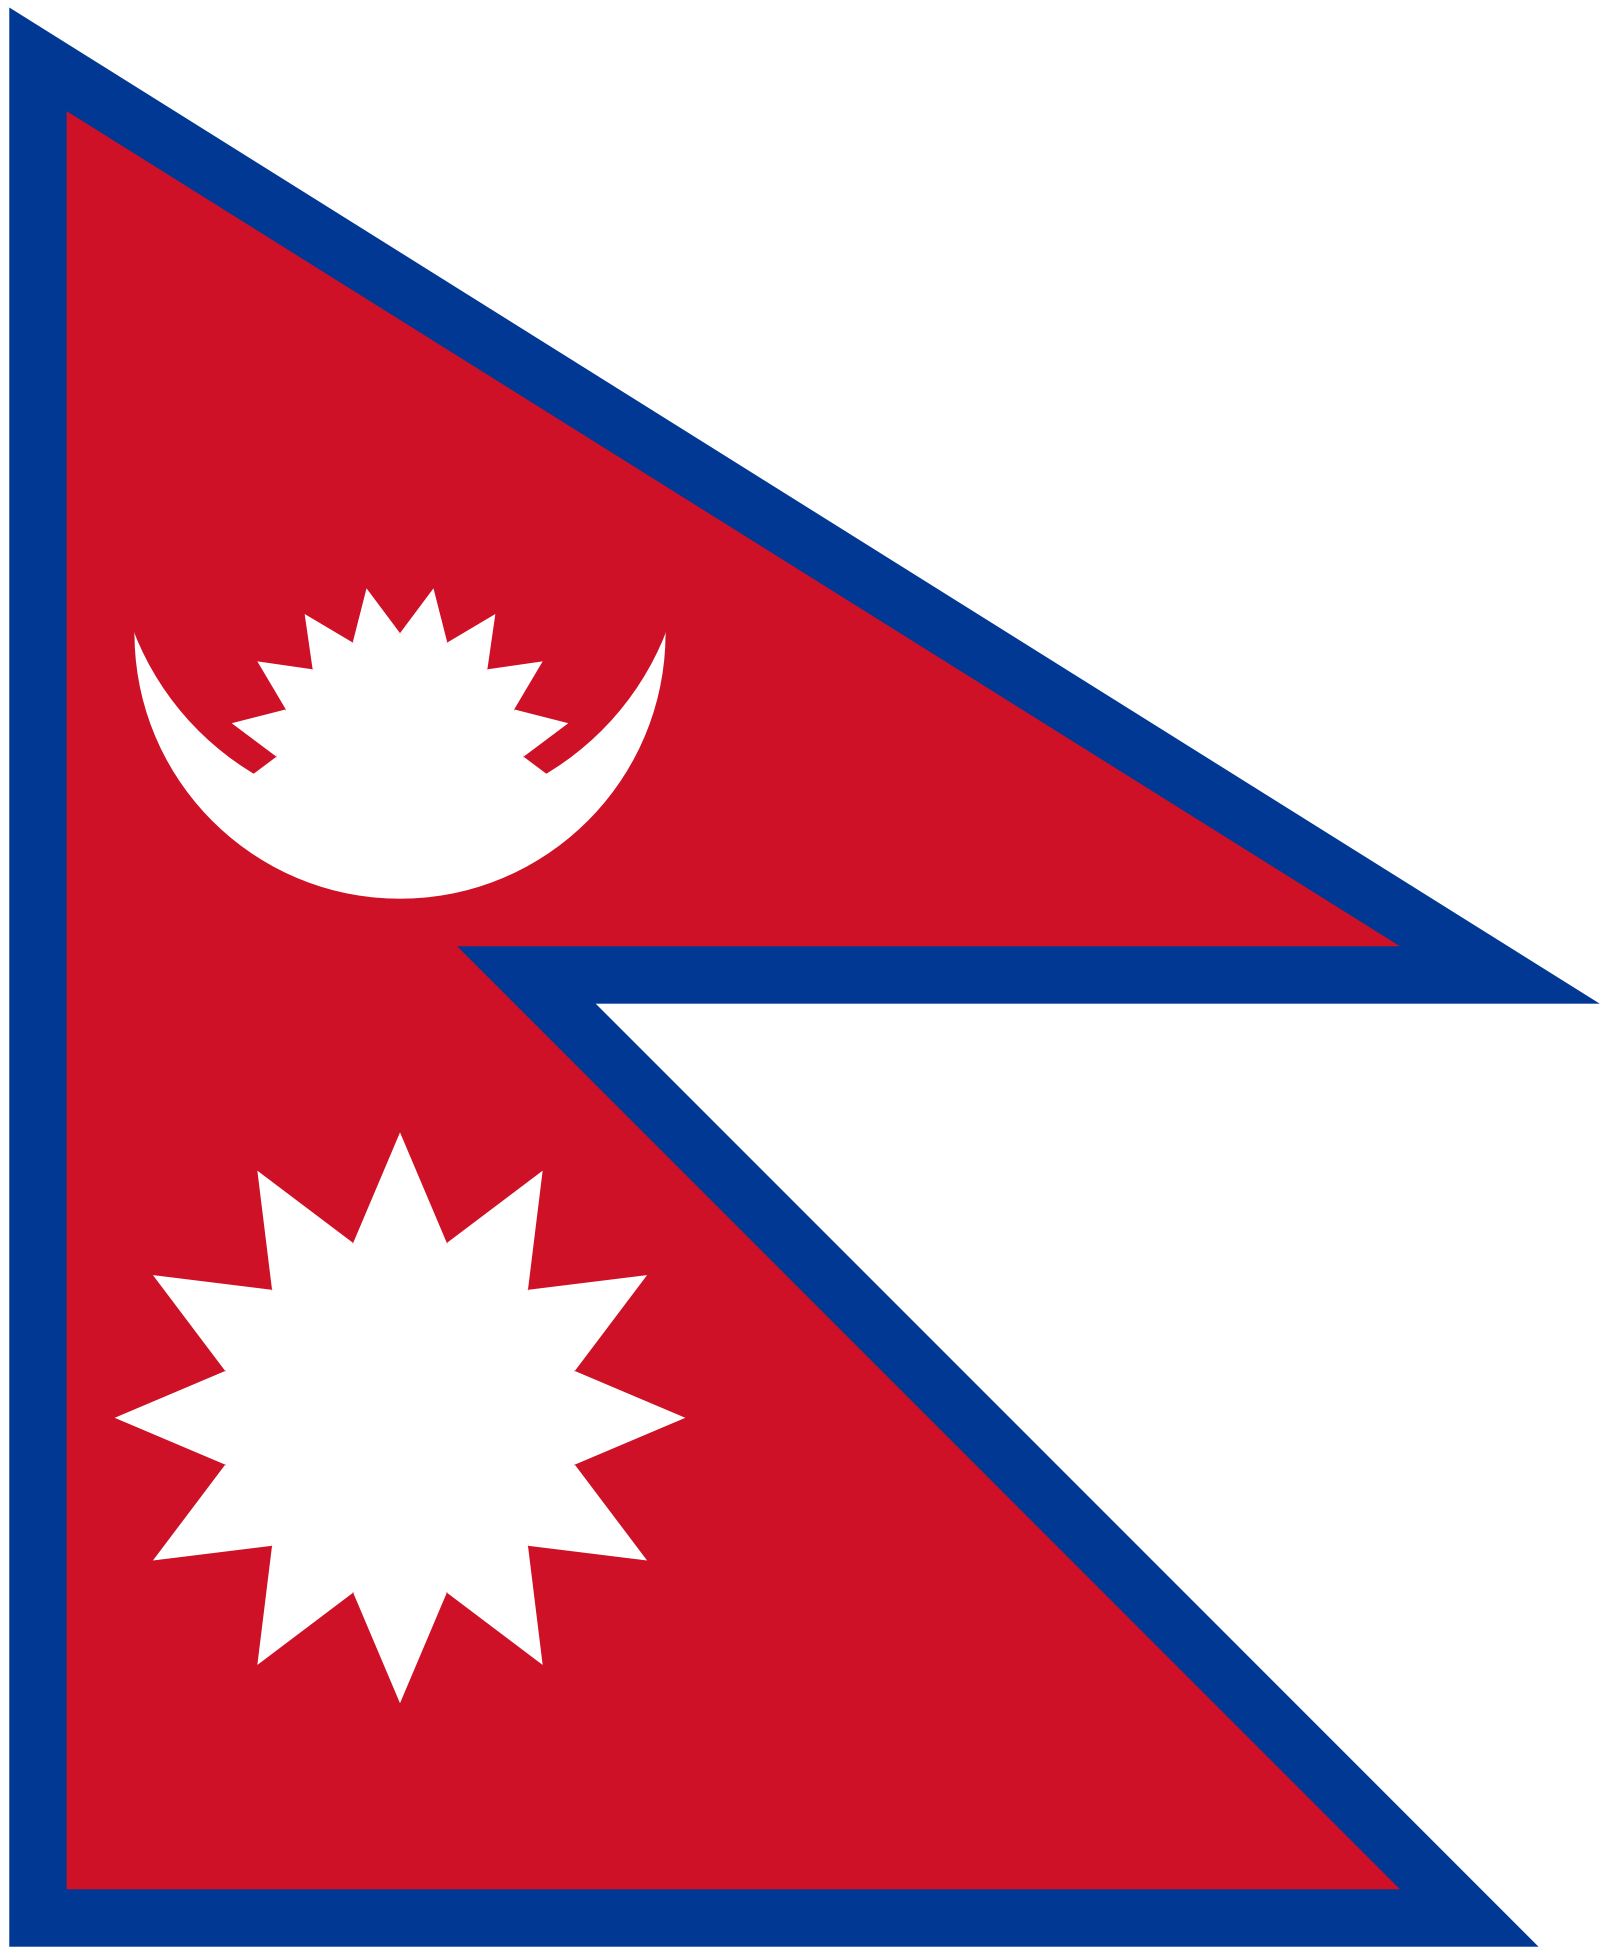 Red Triangle Flag Logo - Nepal | Flags of countries